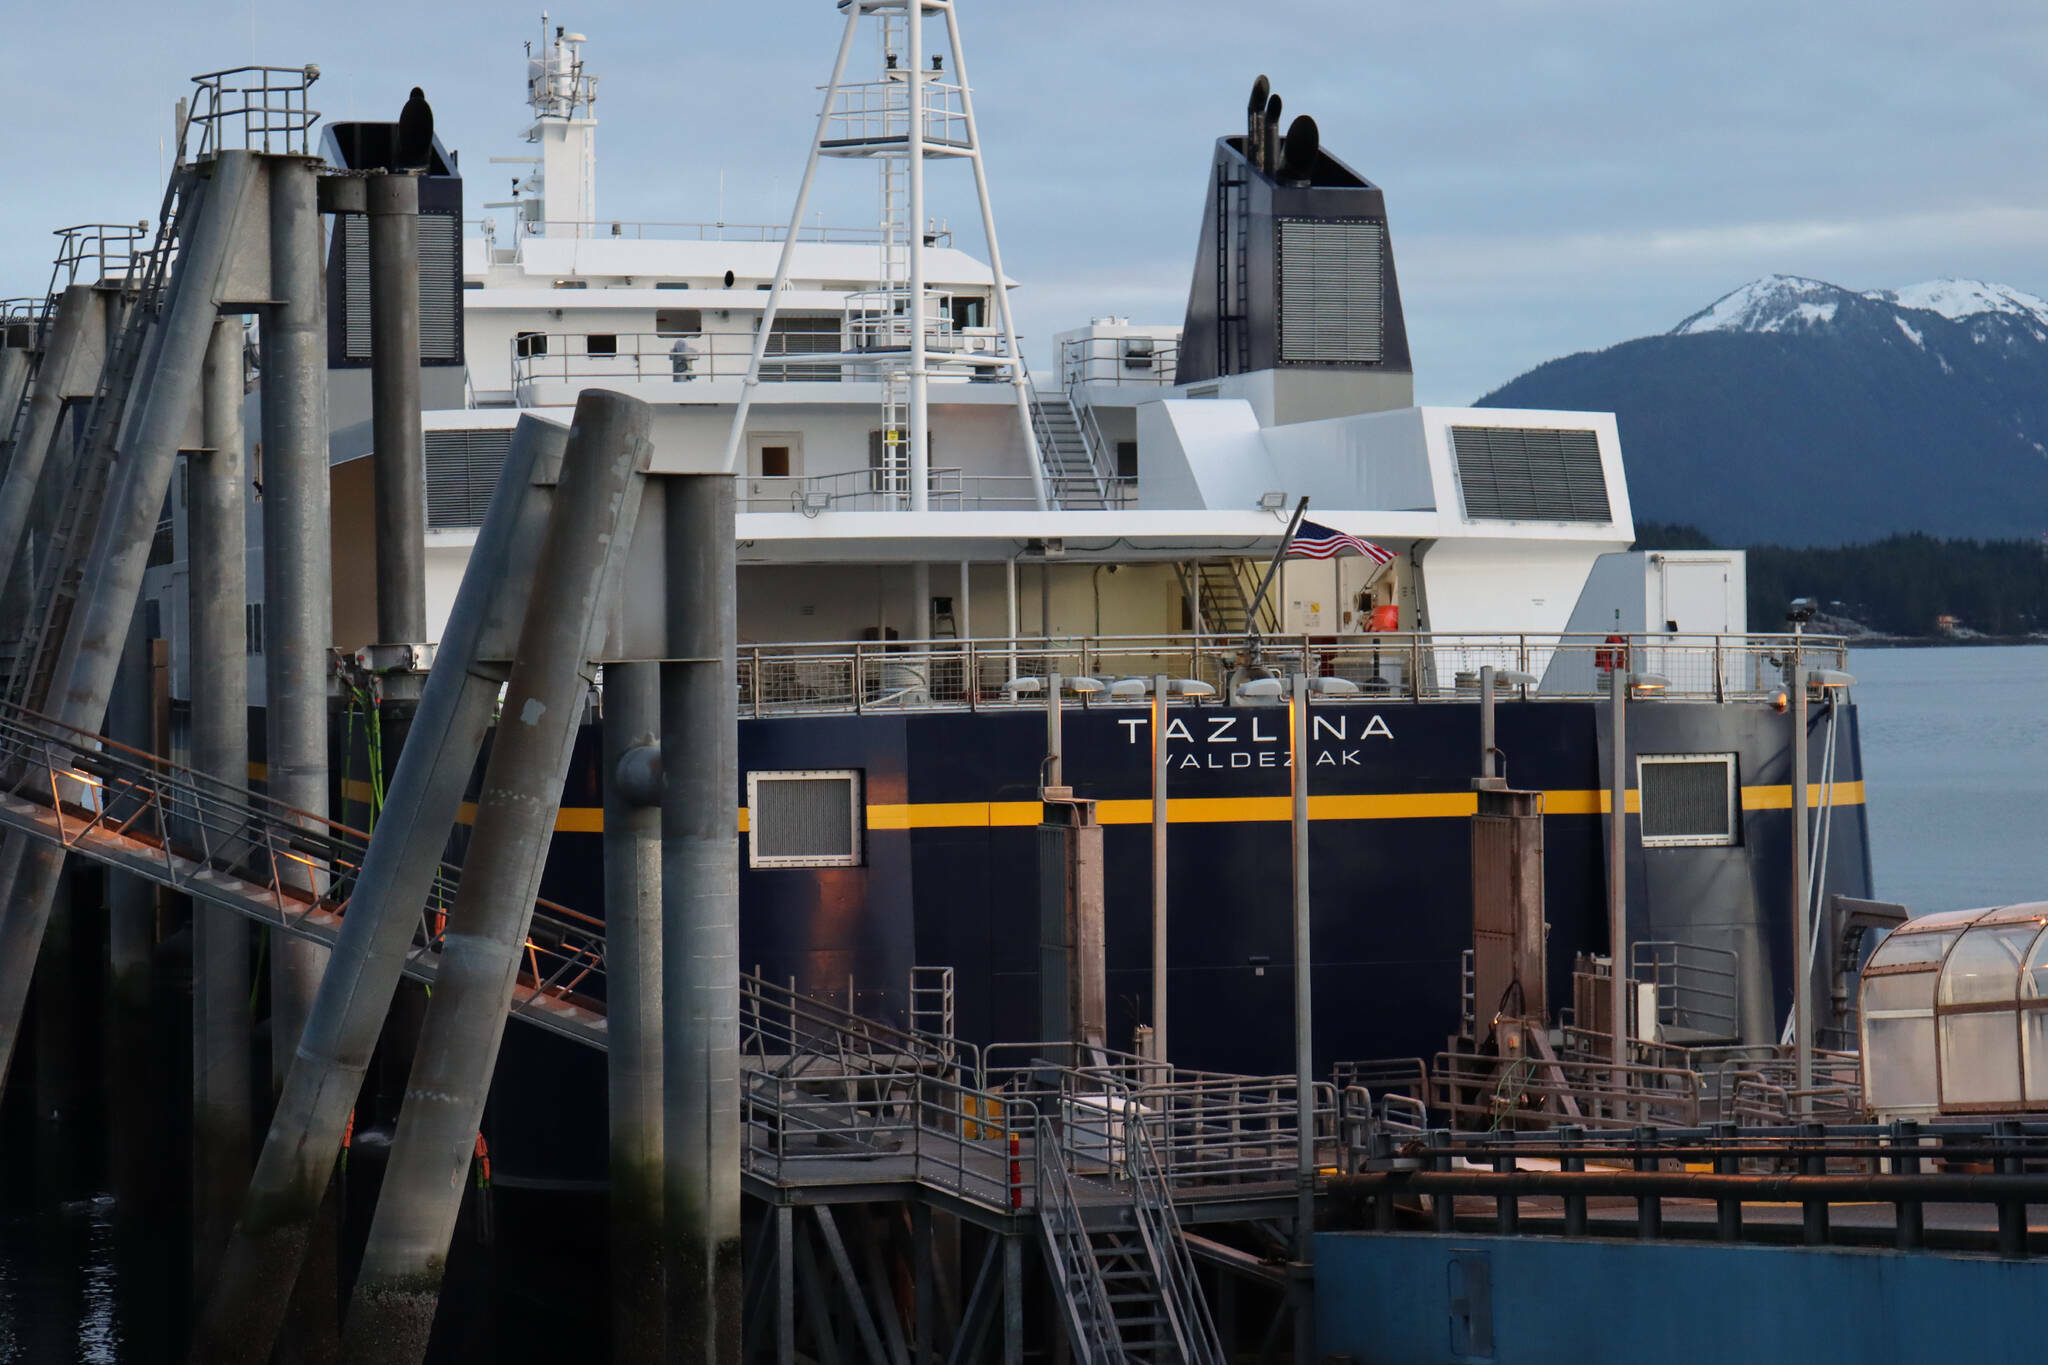 The Tazlina is docked at the Auke Bay ferry terminal in this November 2021 photo. Over a quarter of a billion dollars is on its way to fund six projects for the Alaska Marine Highway System via grant funding awarded by the Federal Transit Administration. (Ben Hohenstatt / Juneau Empire File)